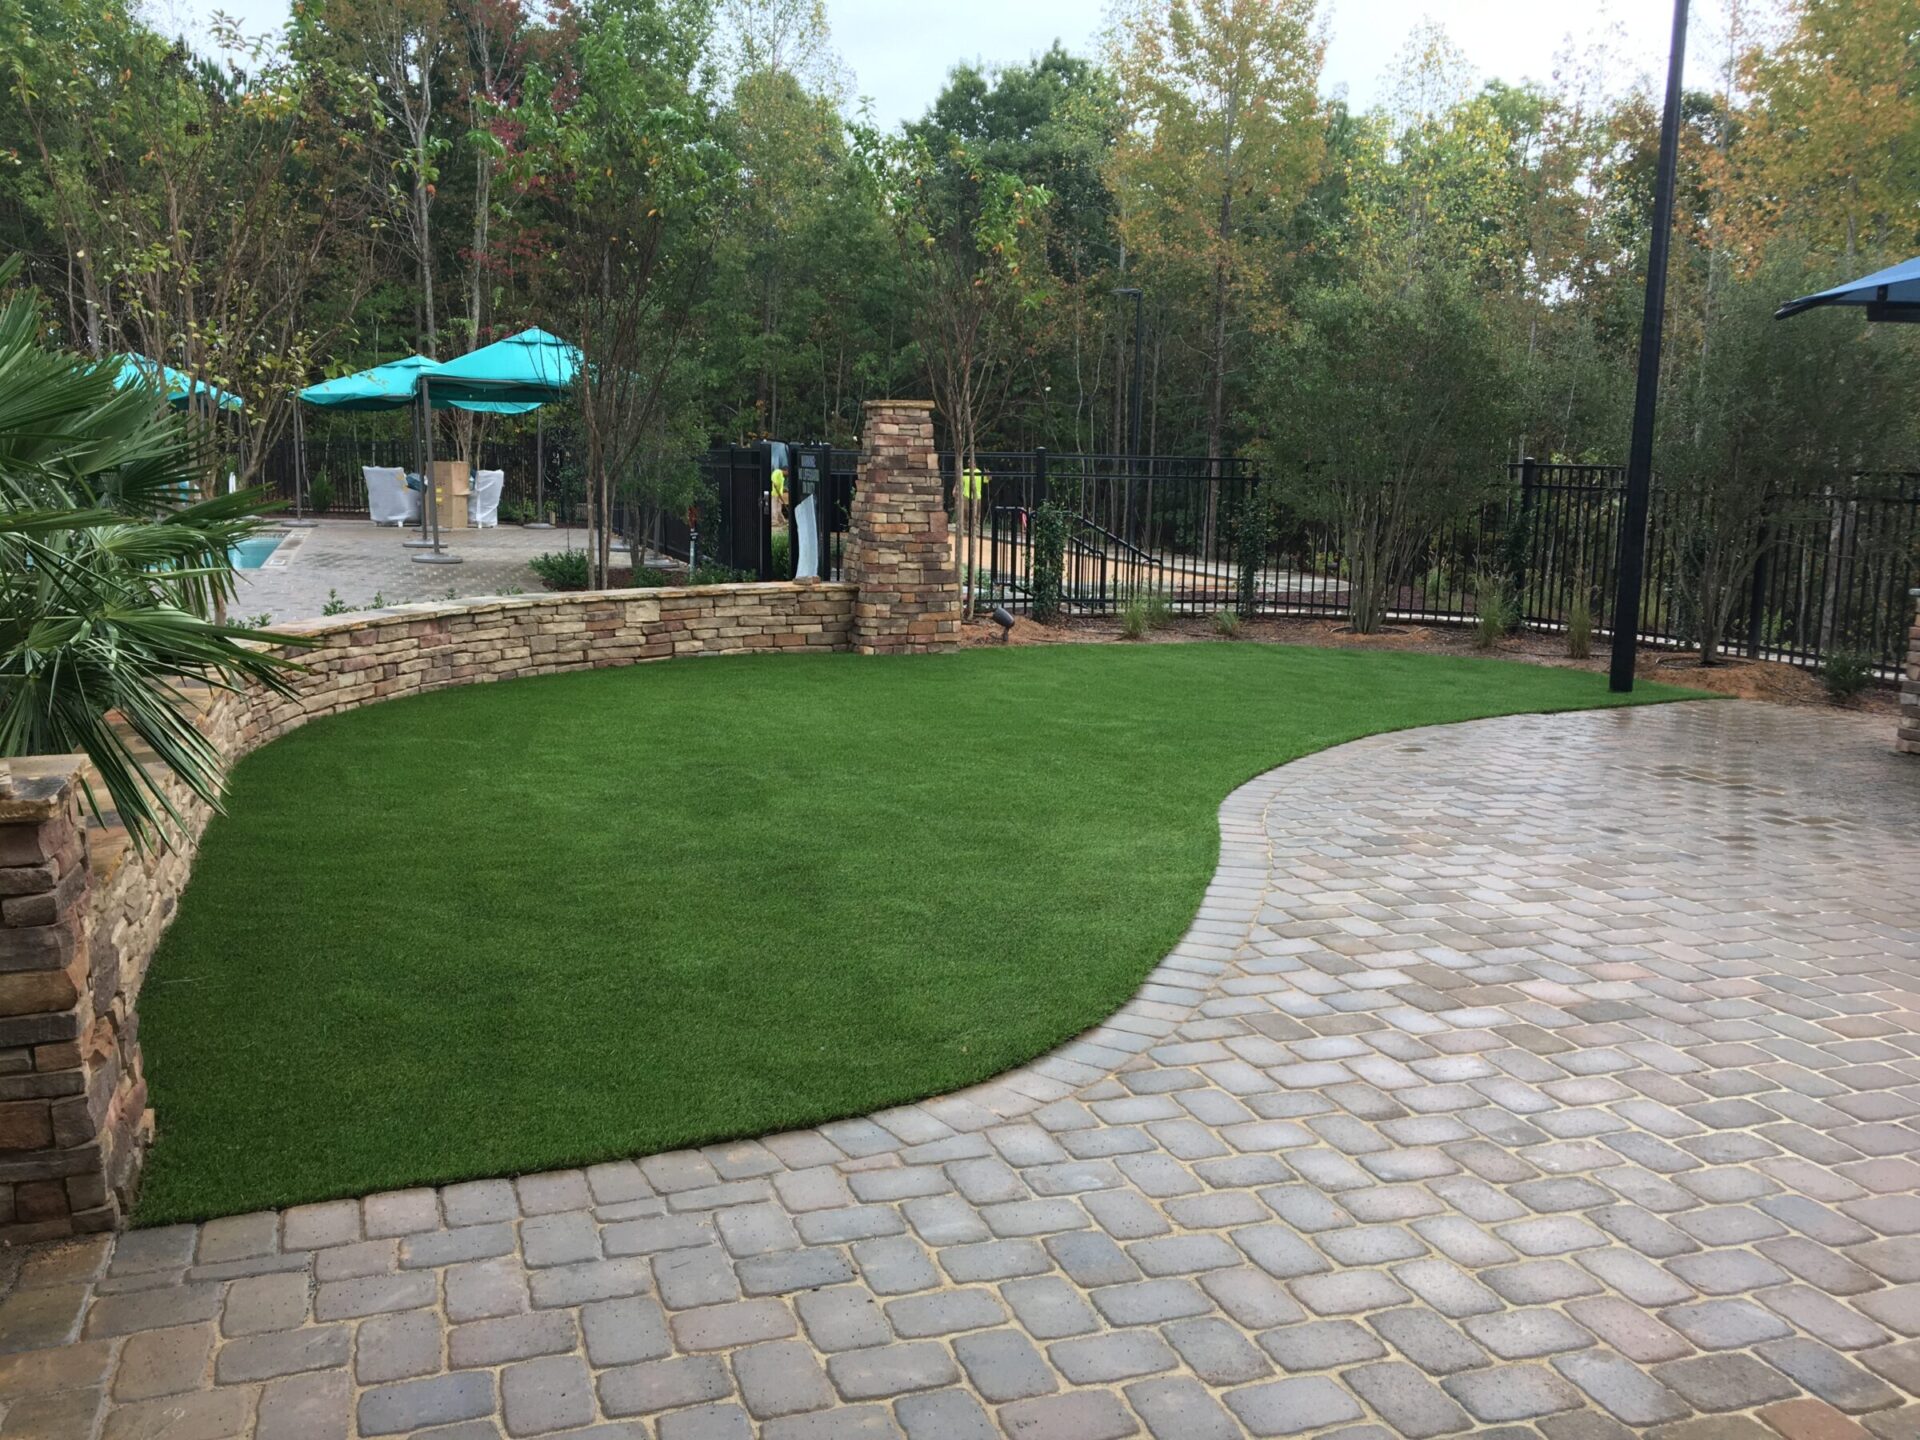 The image shows a landscaped area with artificial grass, stone paving, a curved retaining wall, outdoor umbrellas, trees, and a metal fence.